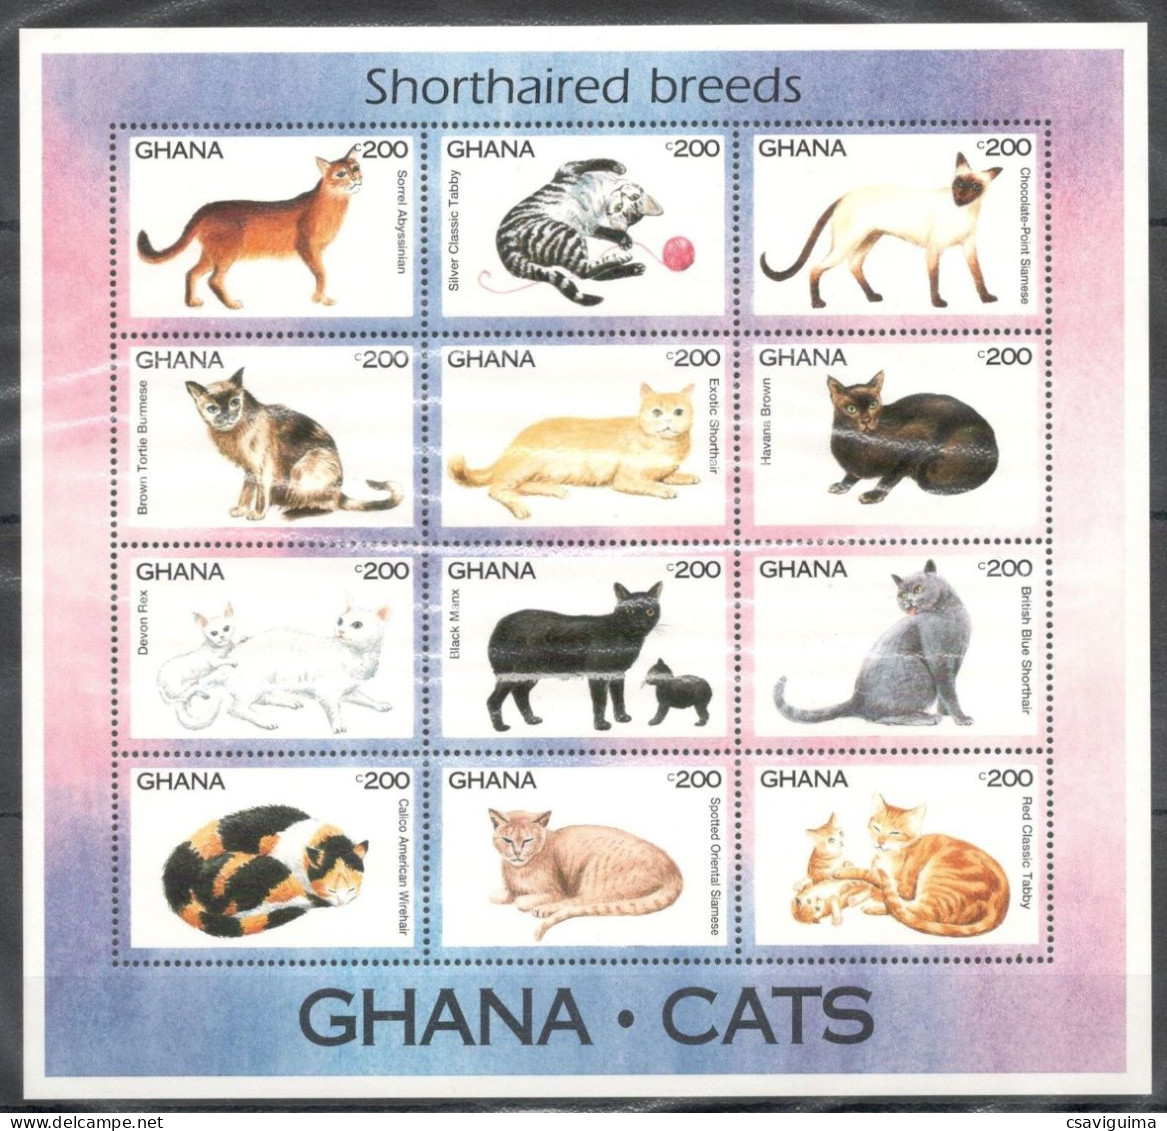 Ghana - 1994 - Cats - Yv 1595/02 - Chats Domestiques